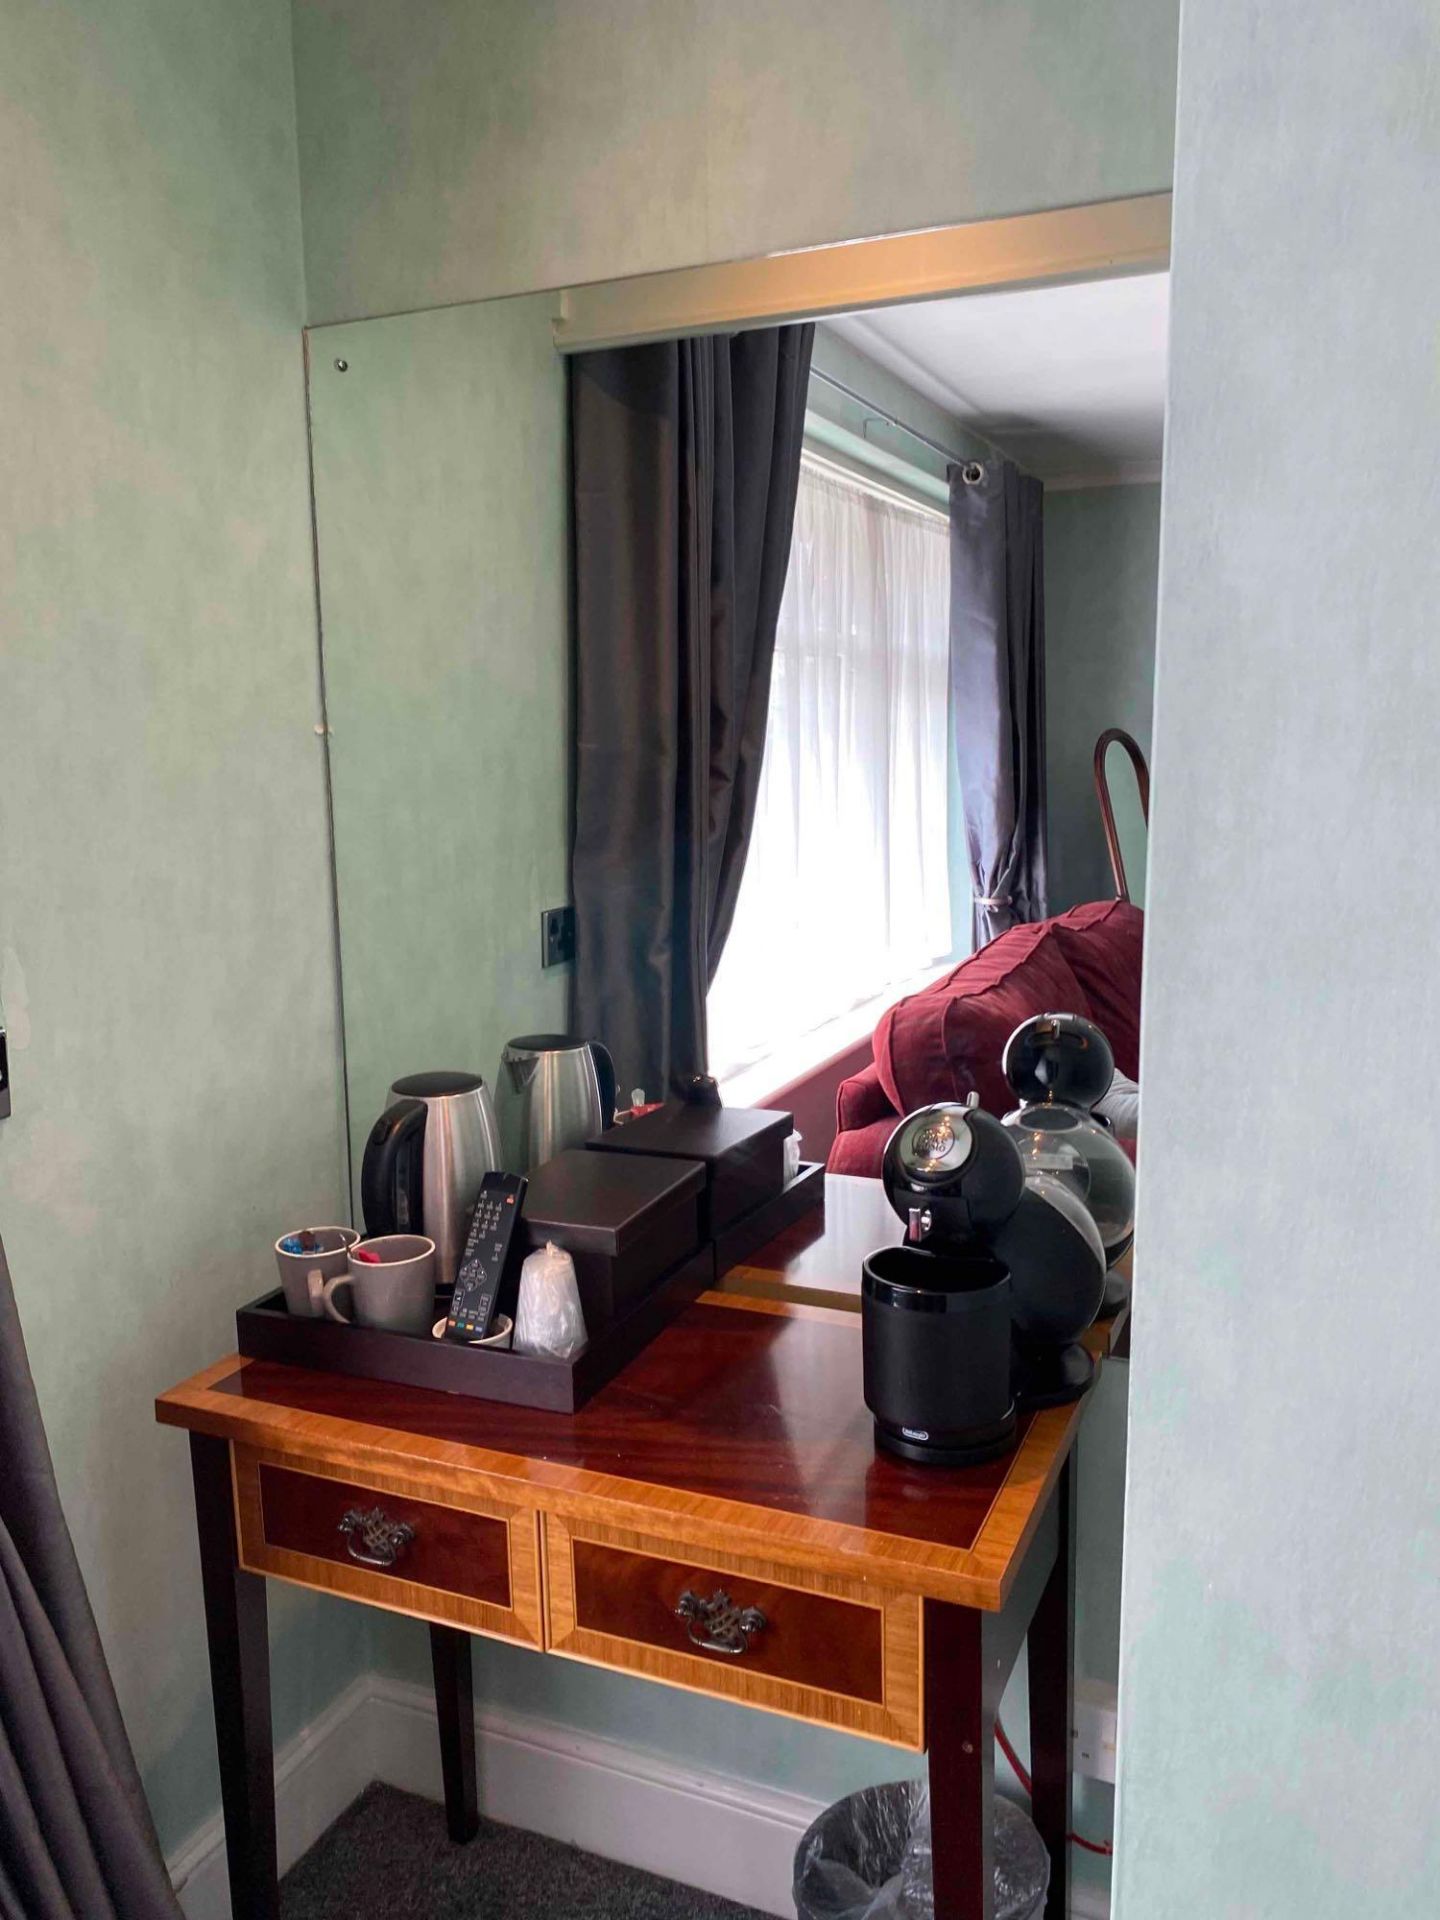 Contents of guest bedroom number 6 at the brookfield hotel. Darkwood desk; waldrobe, mirror, two - Image 16 of 20